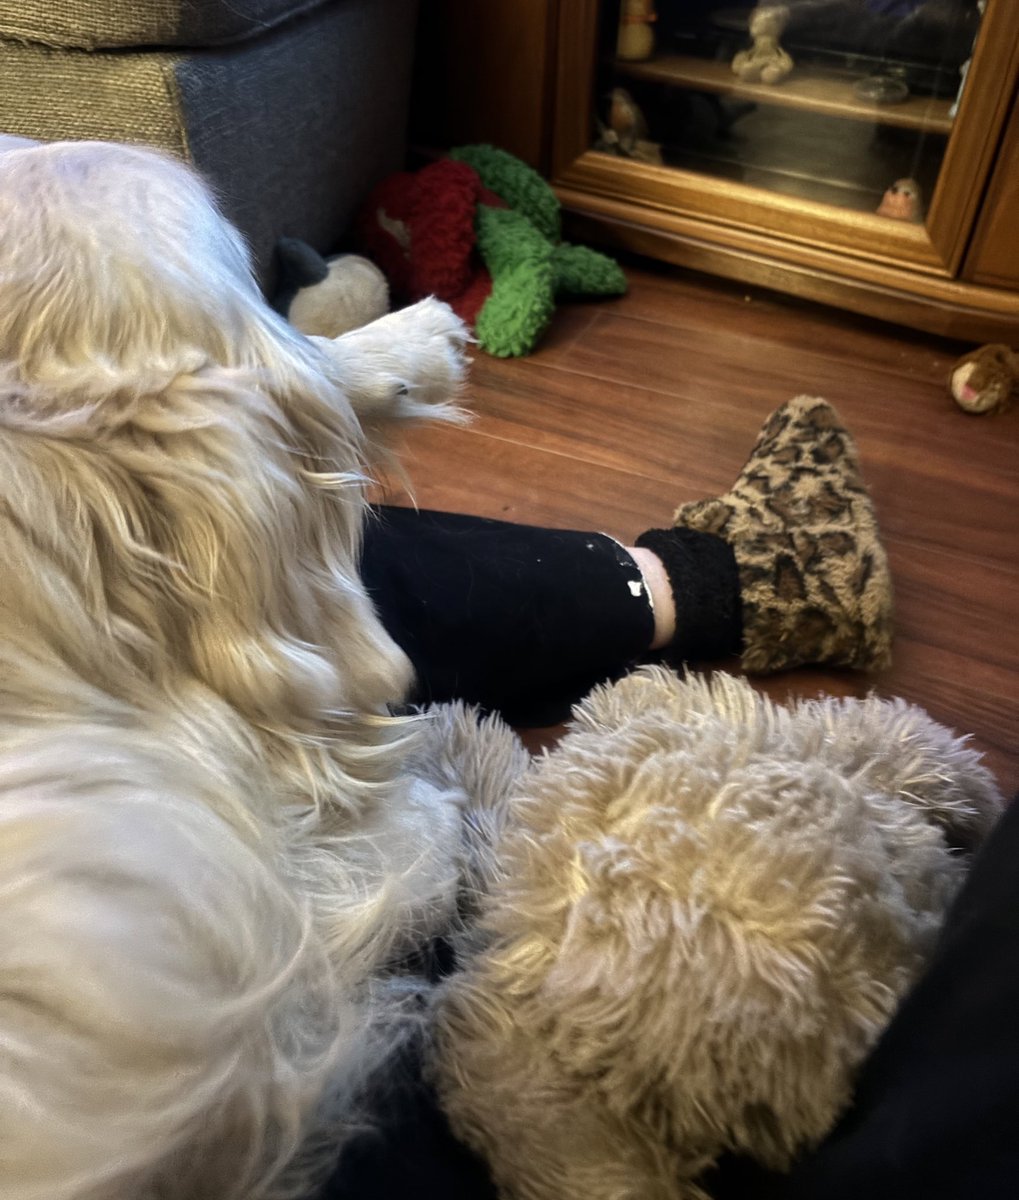 Mum was sitting with me, her left leg is the sore one with her MS, I thought I’d help her! I sat on said left leg, then dangled my leg over her knee to make her feel better. She did say ‘ouch’ a lot but I think it helped 😊 #GoldenRetrievers #love #dogs